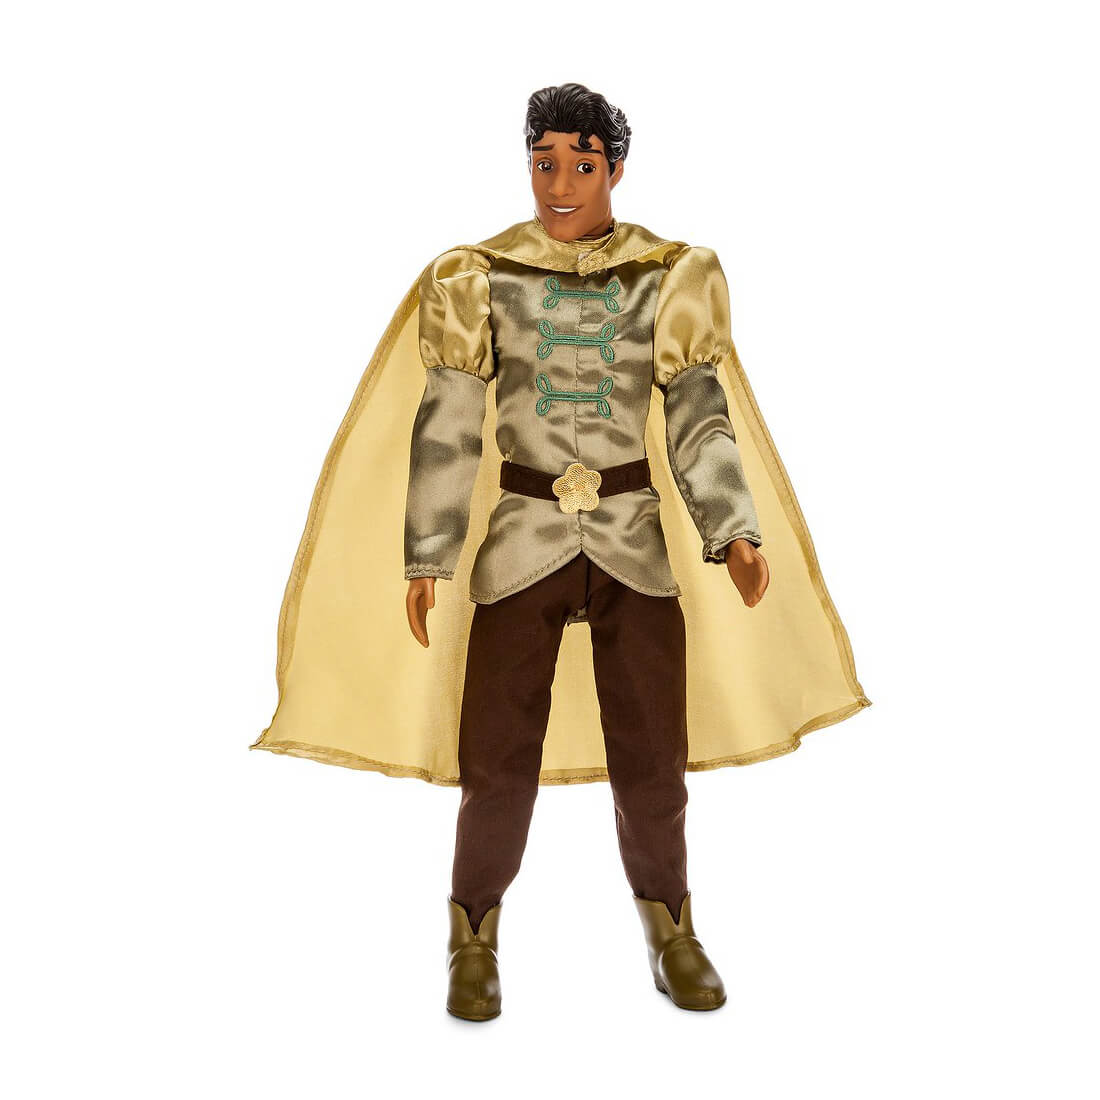  Plus Size Disney Prince Naveen Men's Costume 2X : Clothing,  Shoes & Jewelry